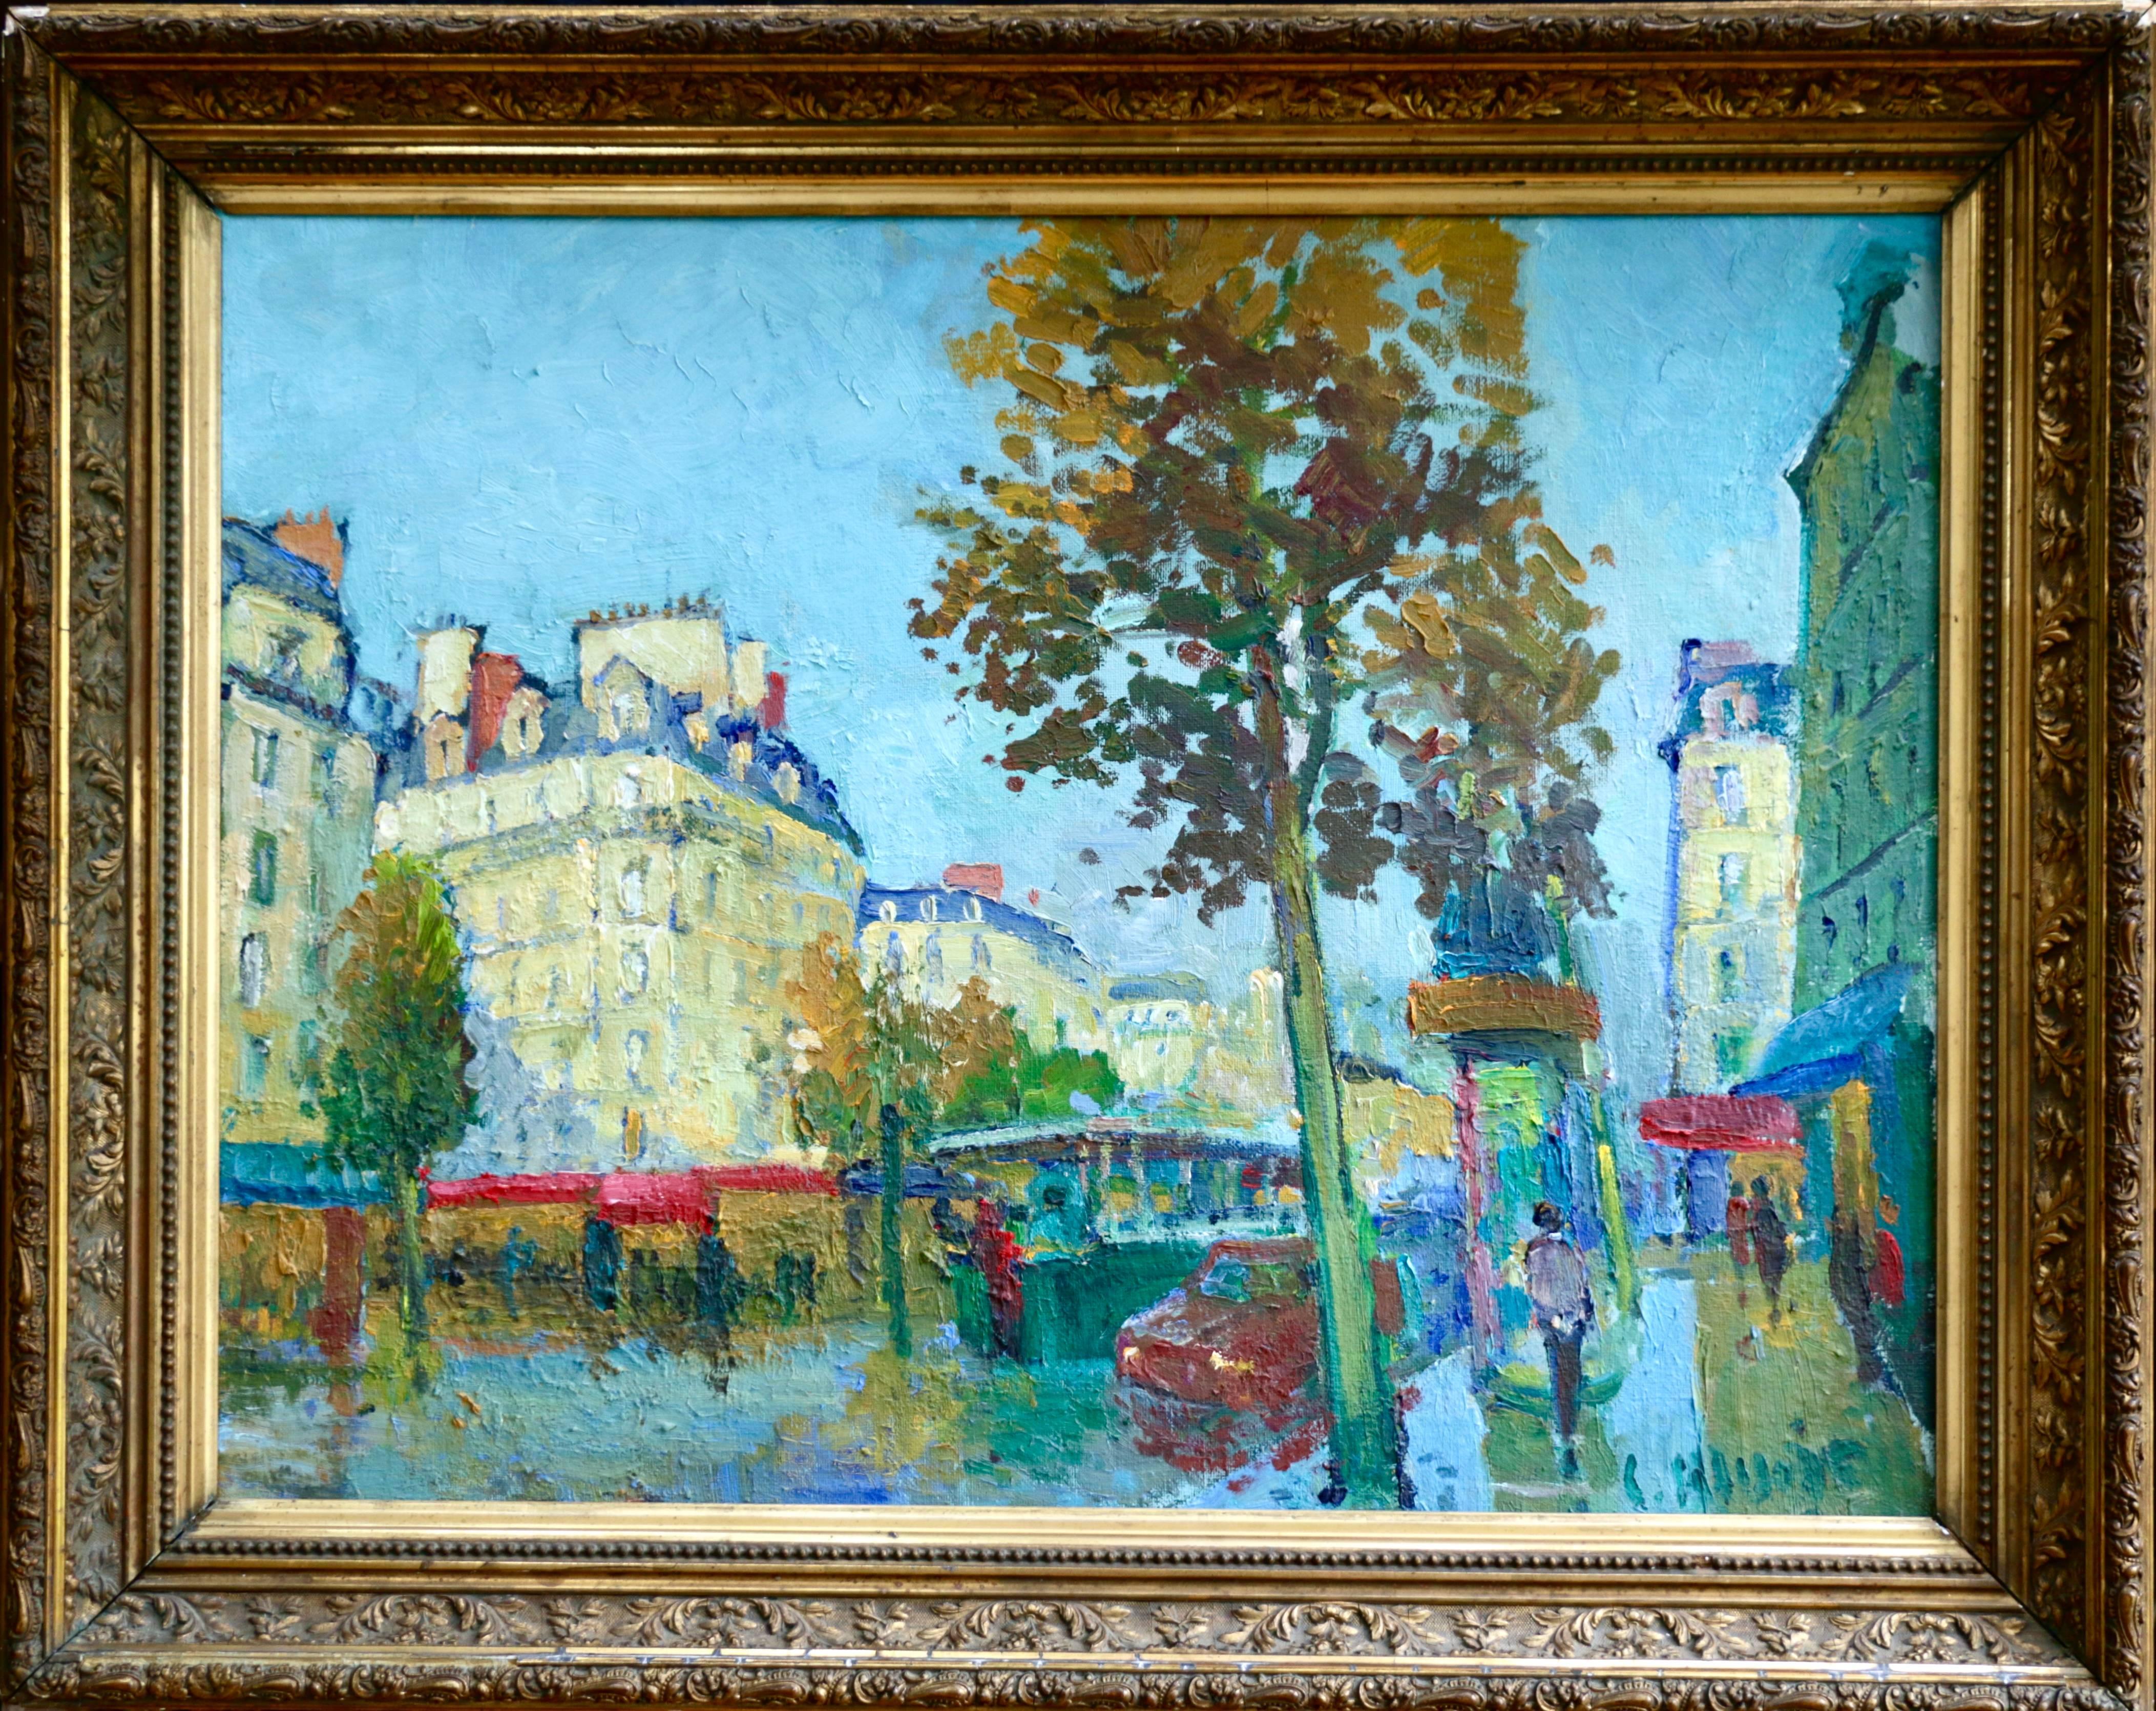 Les Grands Boulevards - 20th Century Oil, Figures in Cityscape by C Kluge - Painting by Constantin Kluge